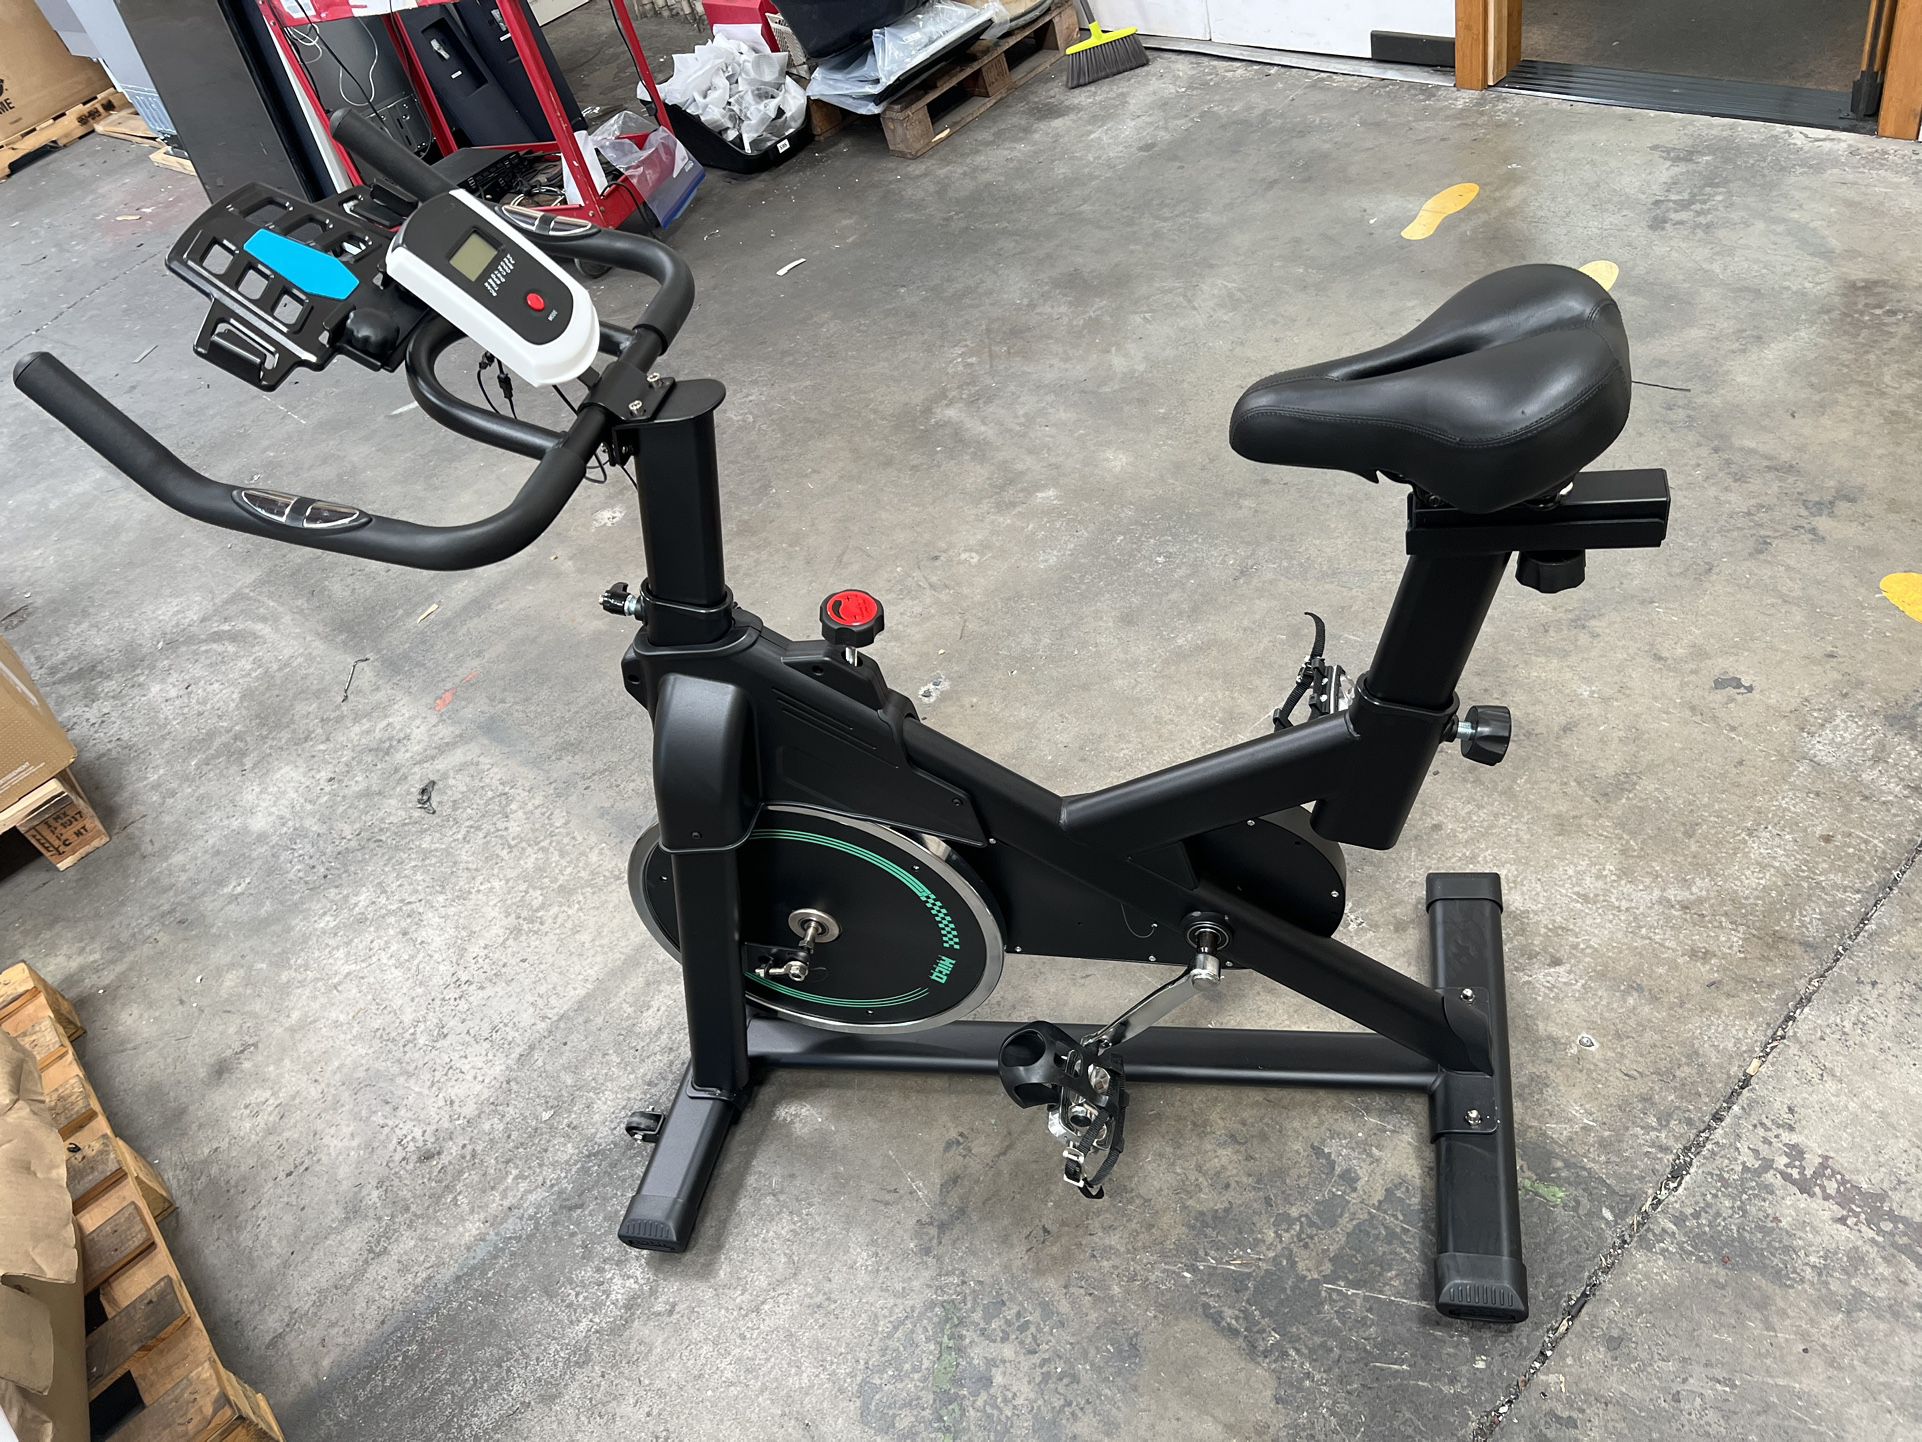 Exercise Bike, Work Out With Healthy And Better Life. New With Box , Easy Install ( Price For Each)